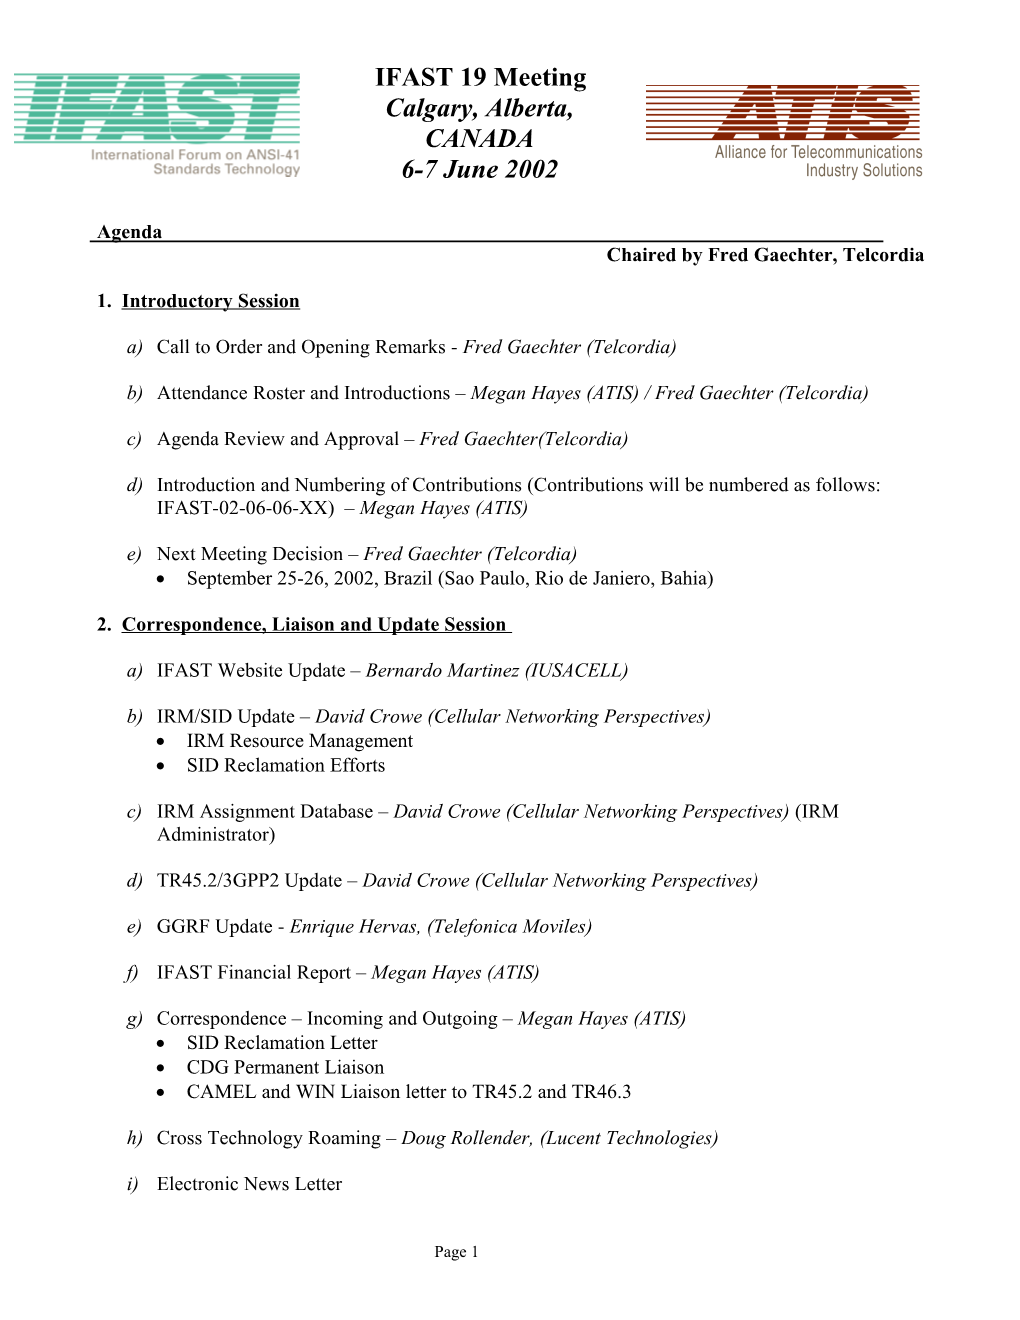 Agenda Items for IFAST14